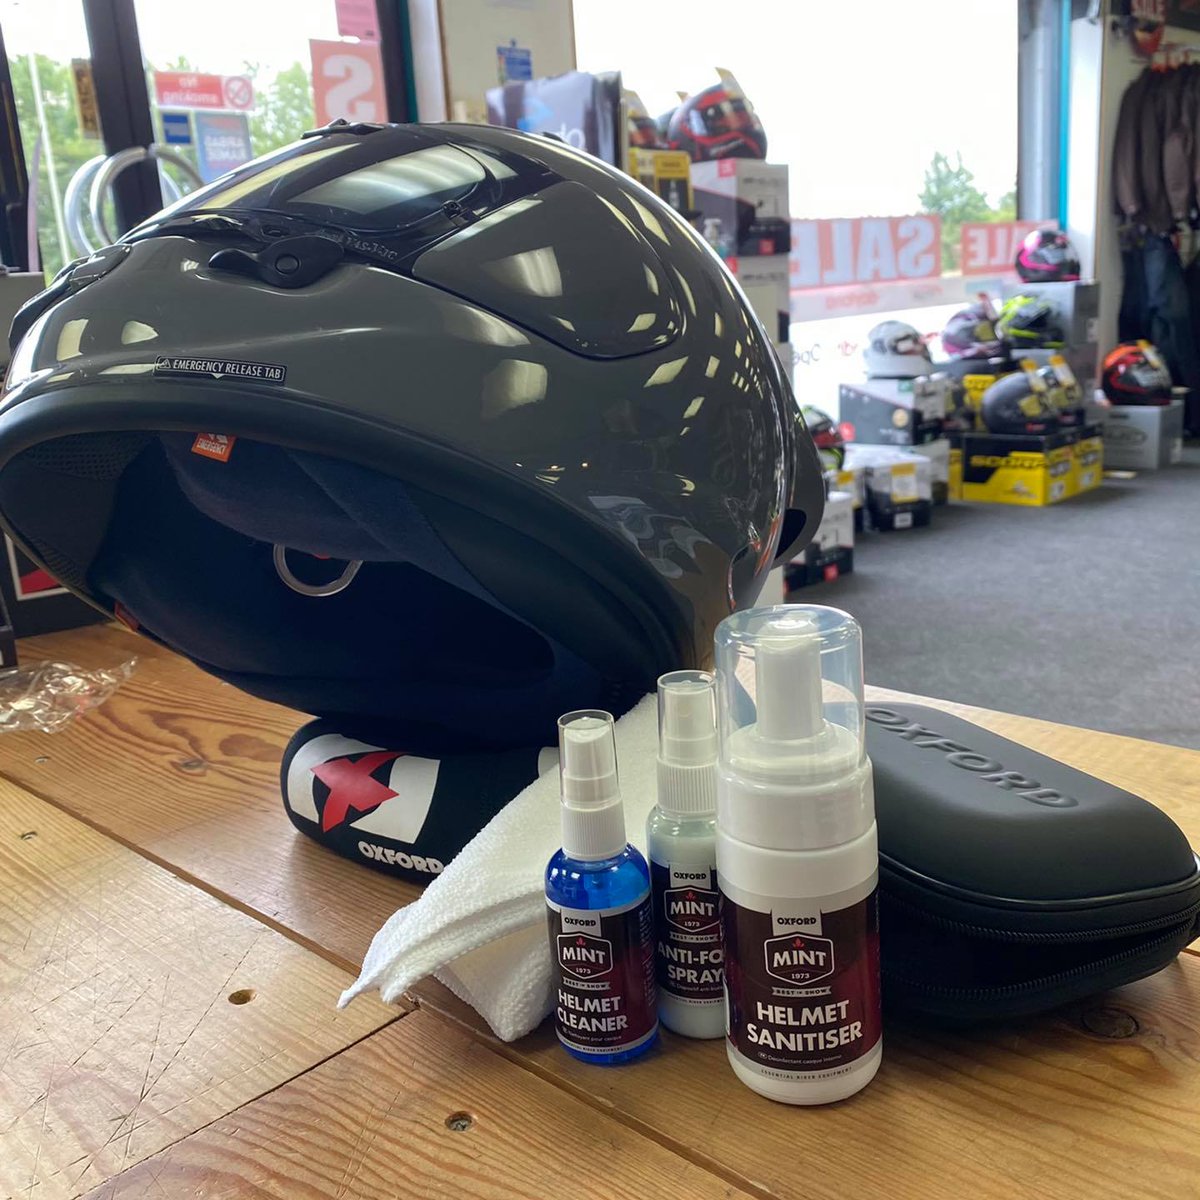 Time to give your motorcycle gear a little spruce up?🧽 Here's some essential accessories you need!

✨ Oxford Mint Helmet Care Kit: Everything you need to maintain the cleanliness & functionality of your helmet & visor, including sanitiser, anti-fog, cleaner and&microfibre cloth